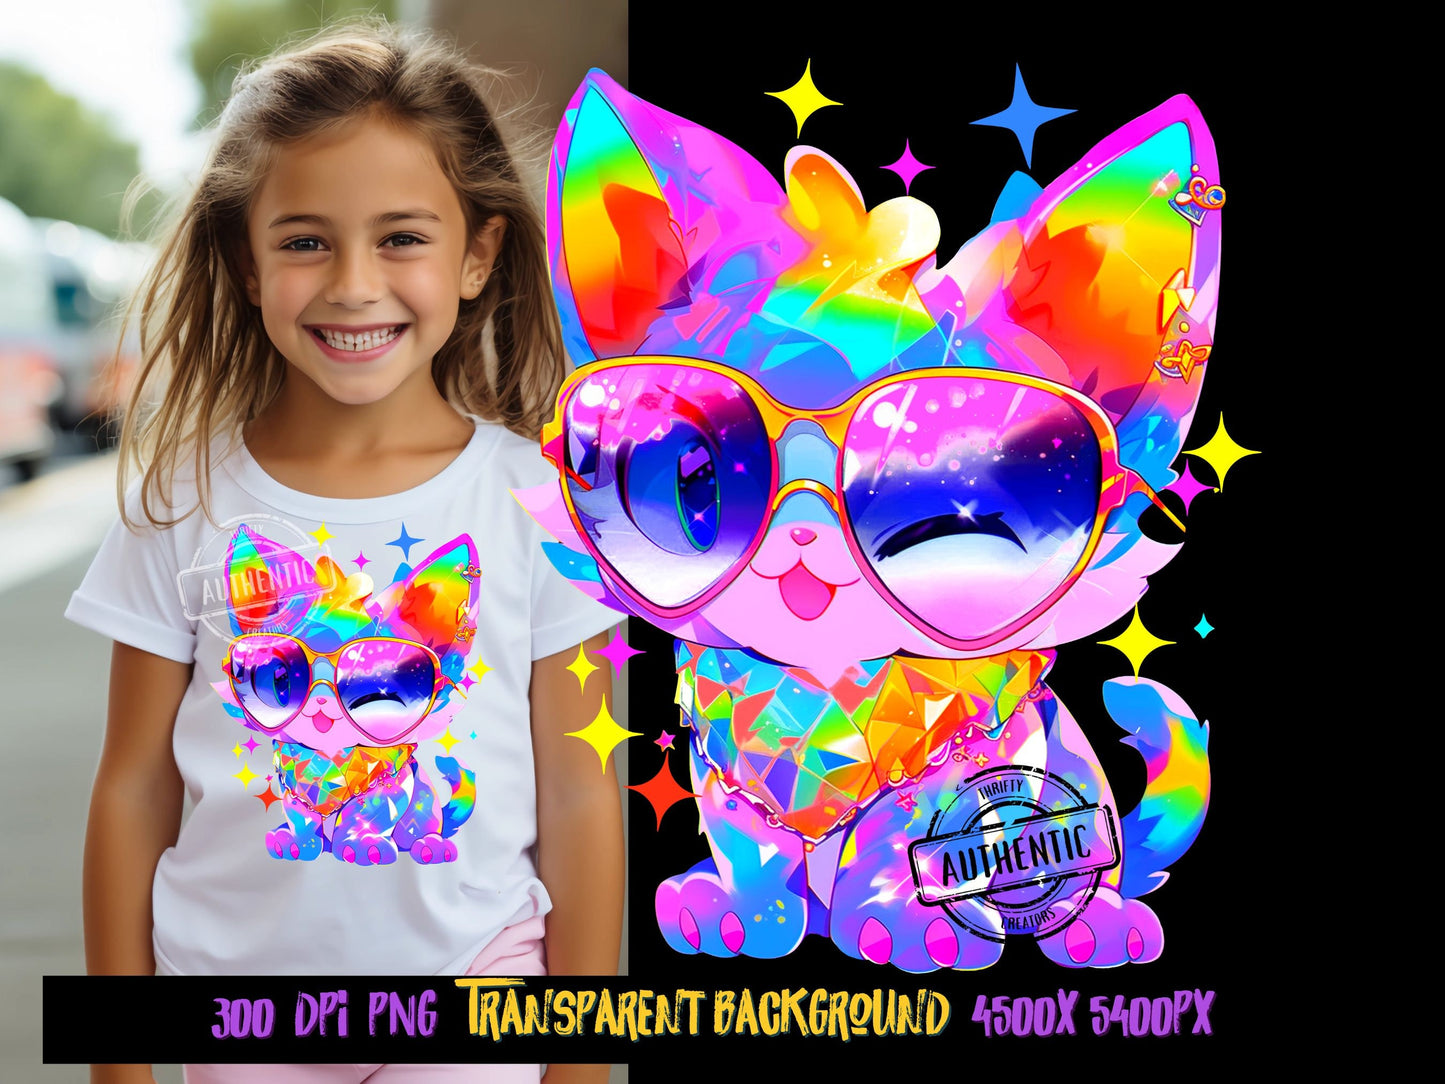 Adorable Kawaii Cat PNG - Perfect for sublimation designs! Ideal for kids' shirts, this cute, colorful kitten is designs by Thrifty Creators